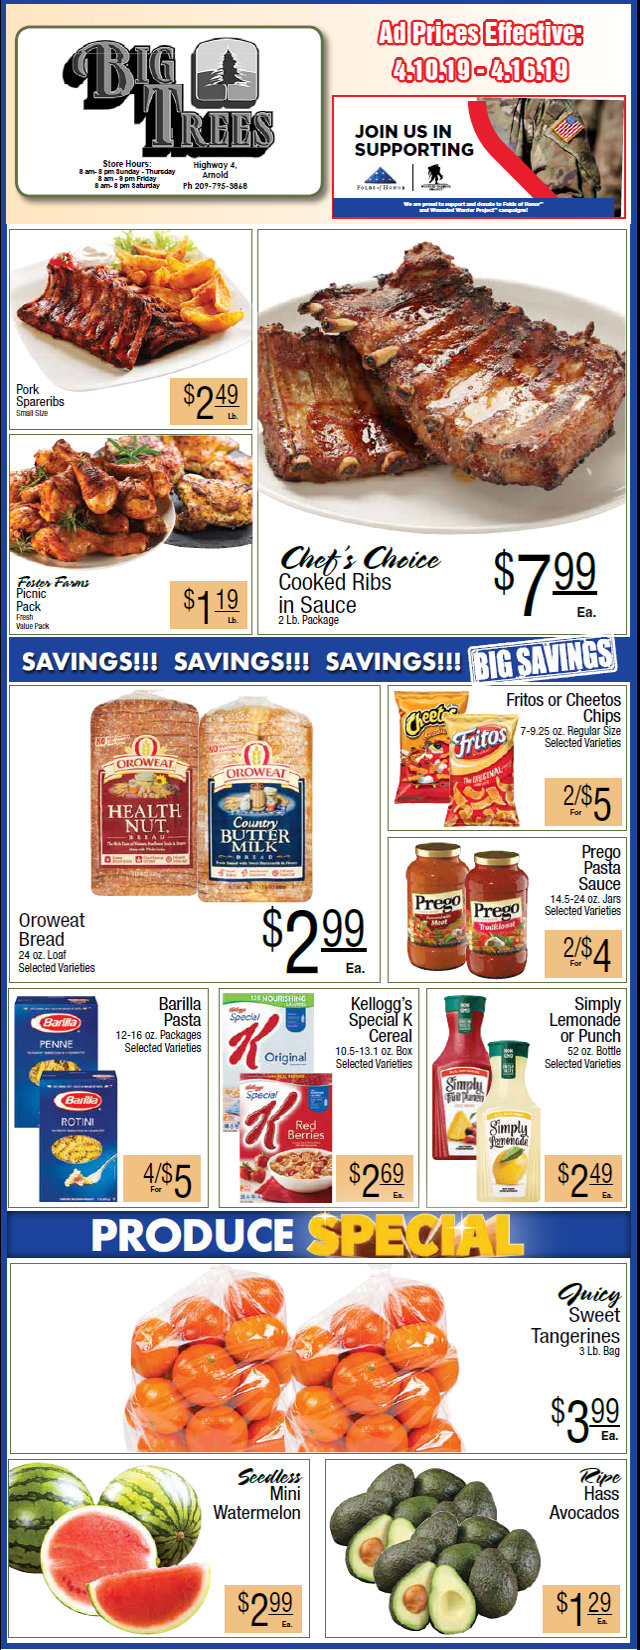 Big Trees Market Weekly Ad & Grocery Specials Through April 16th